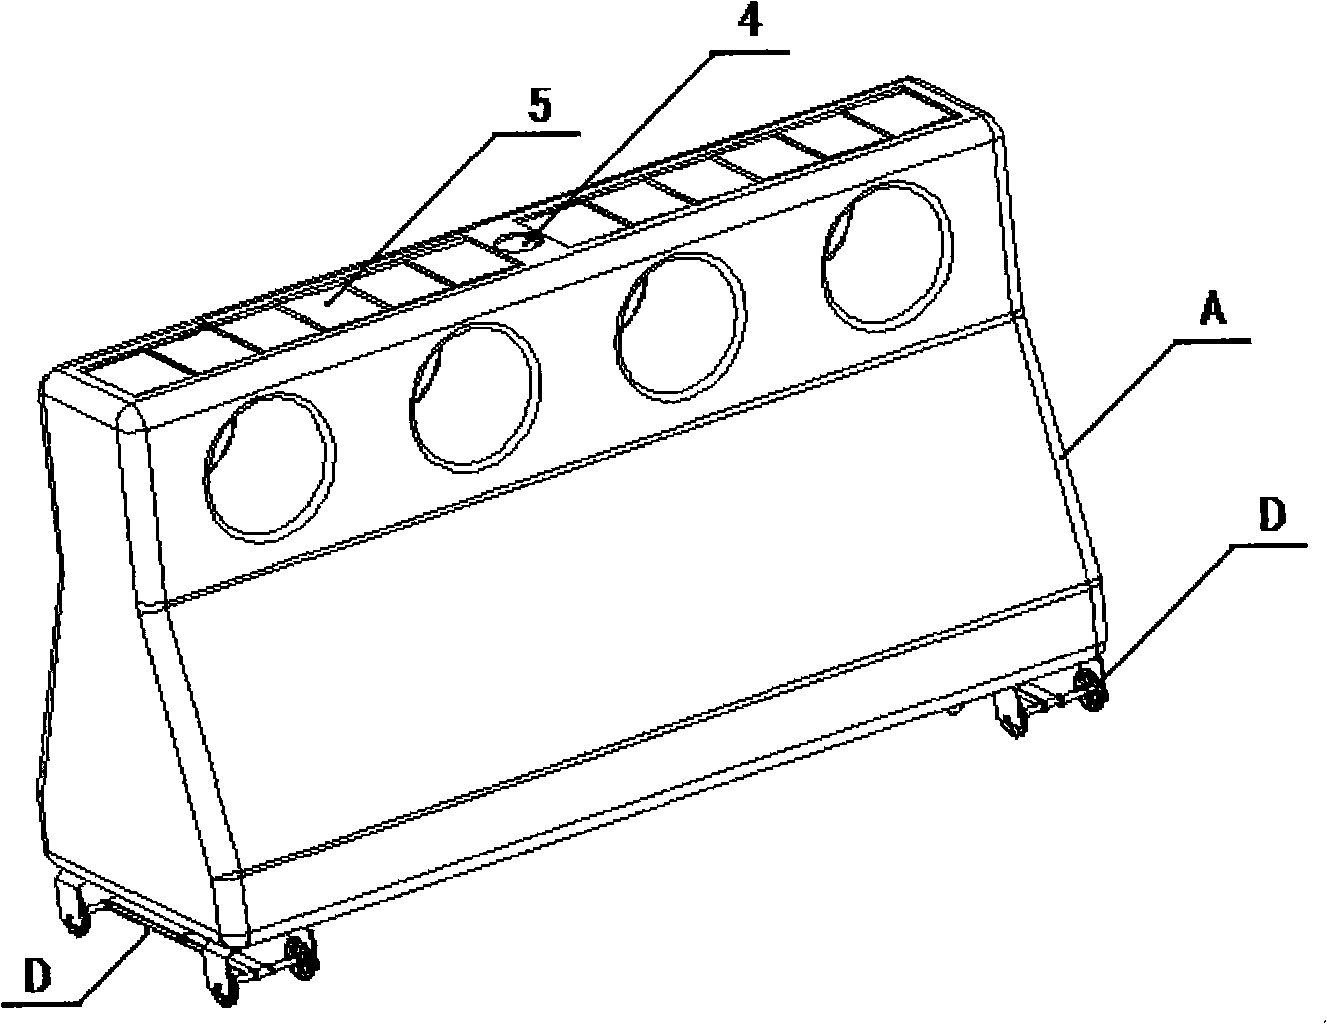 Moveable isolation barrier possessing automatic regulating function